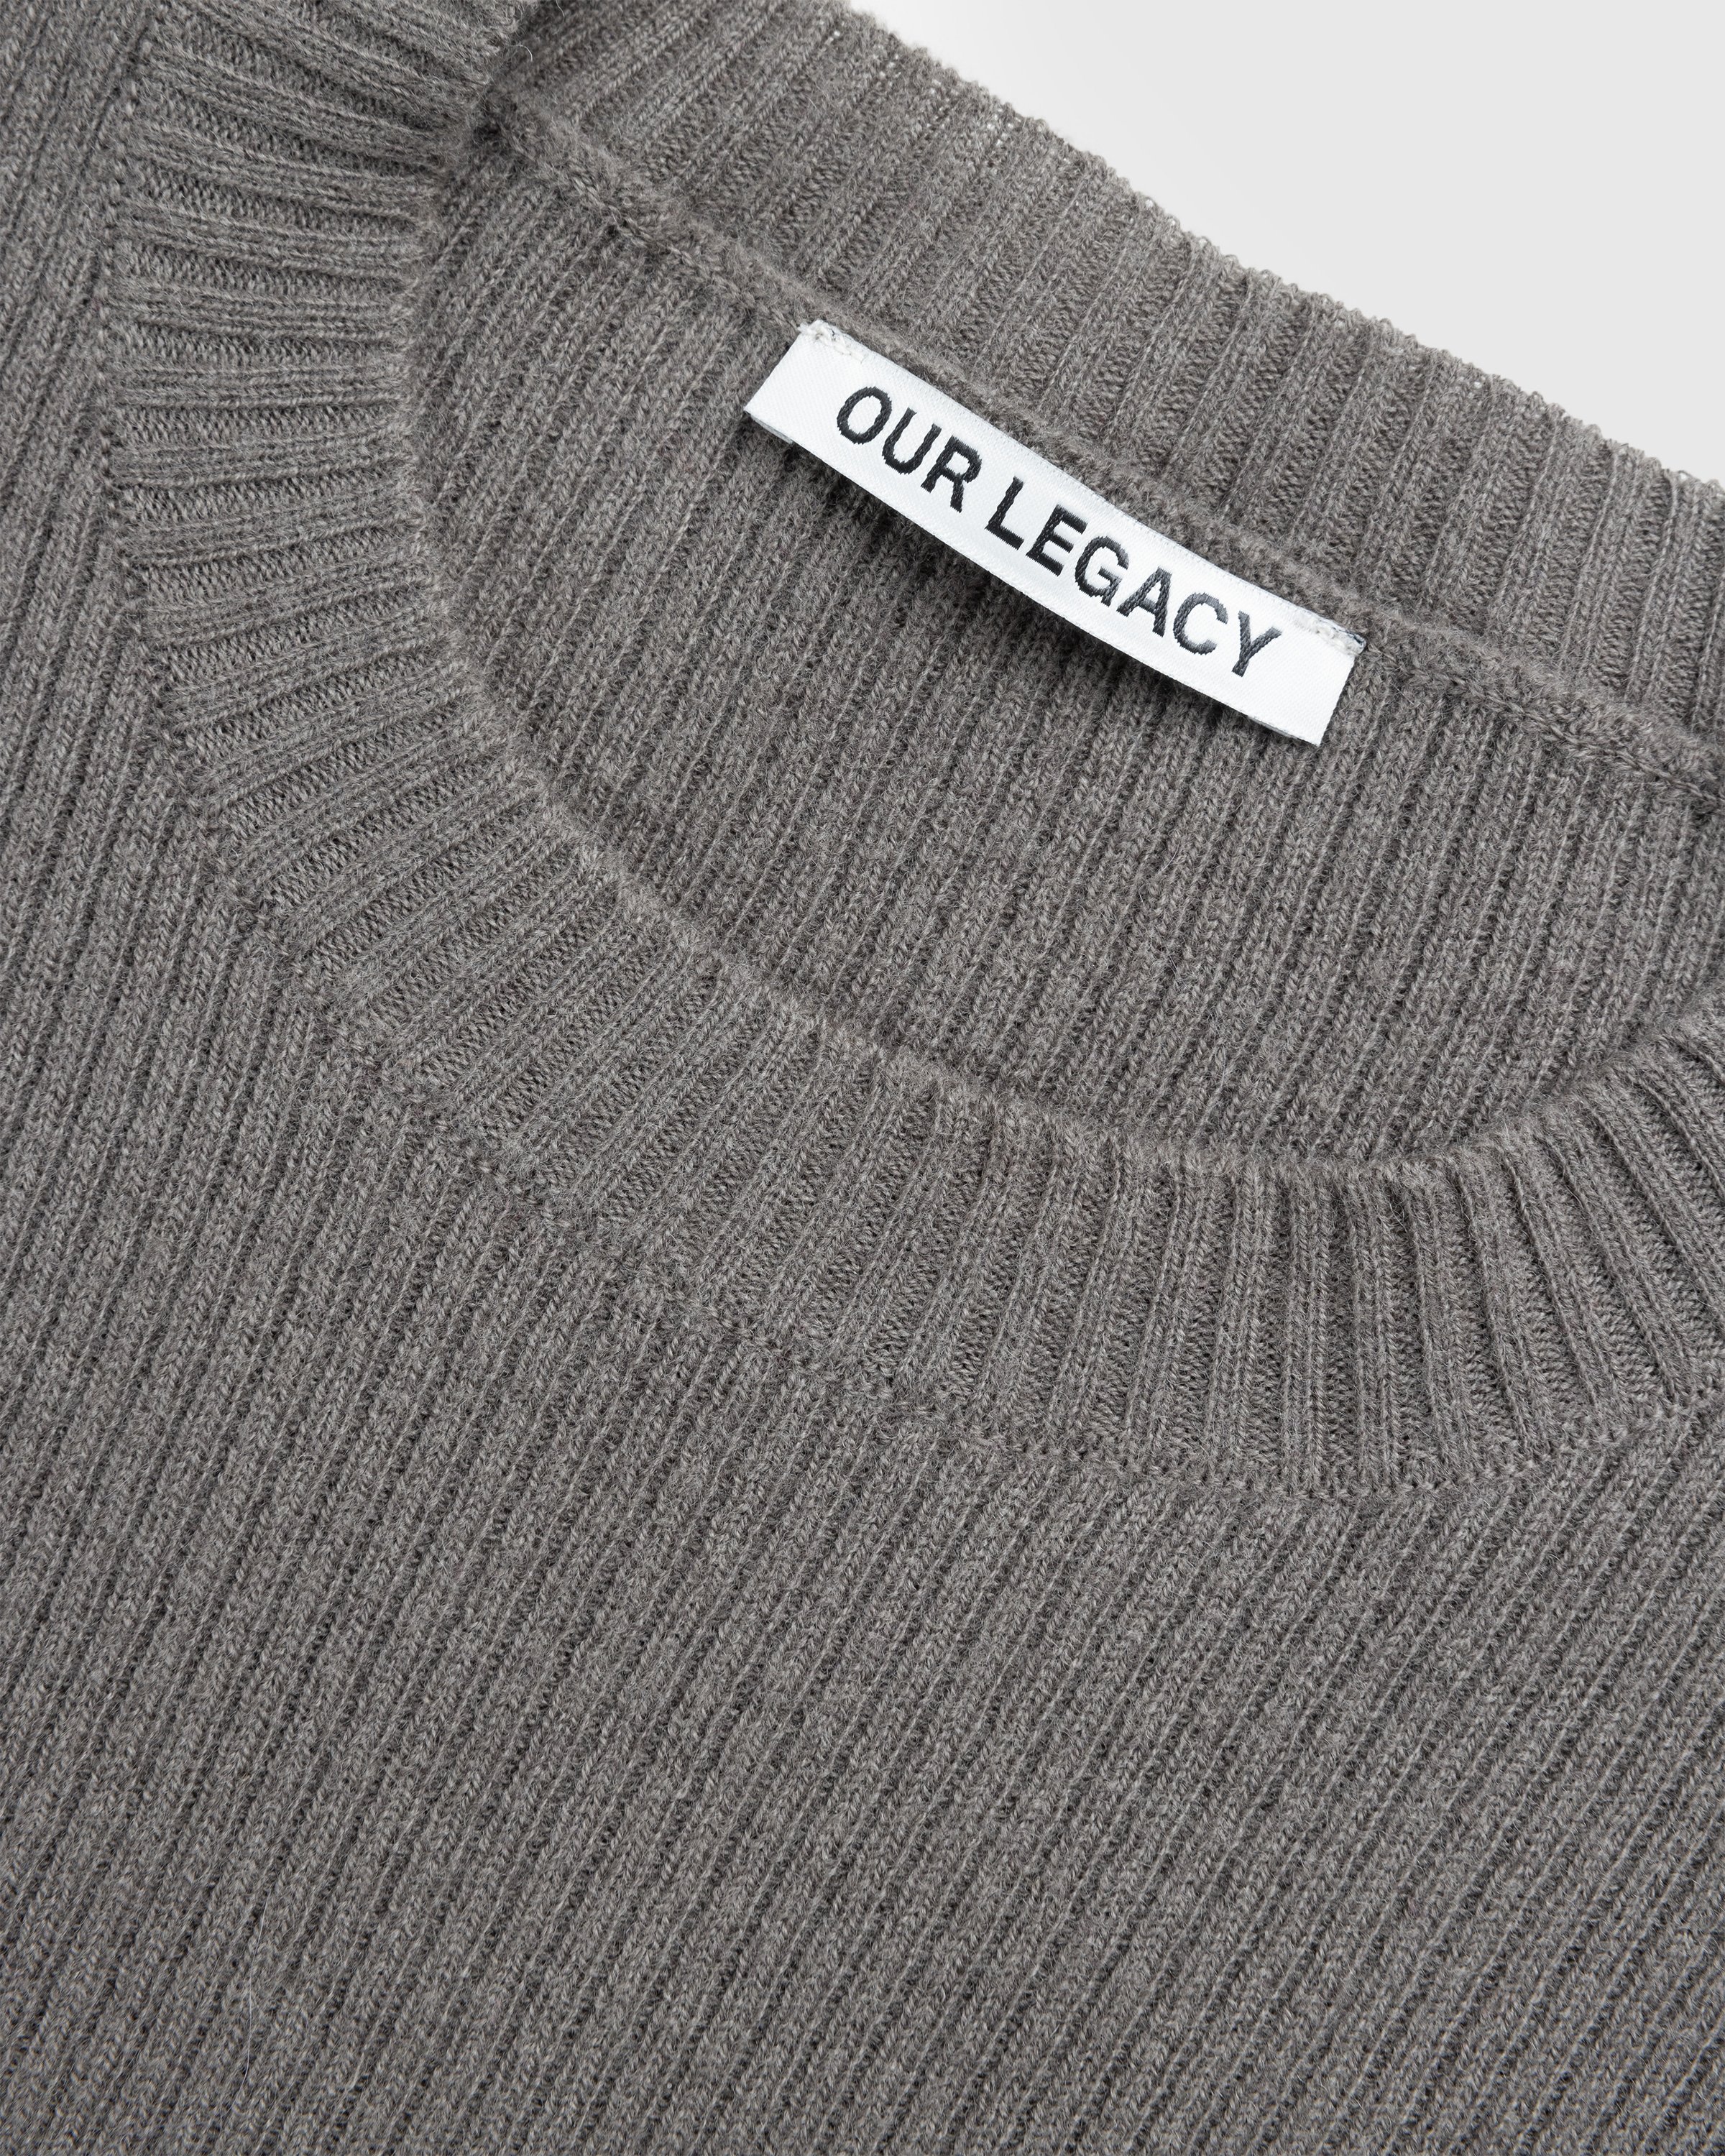 Our Legacy - COMPACT ROUNDNECK Grey - Clothing - Grey - Image 6